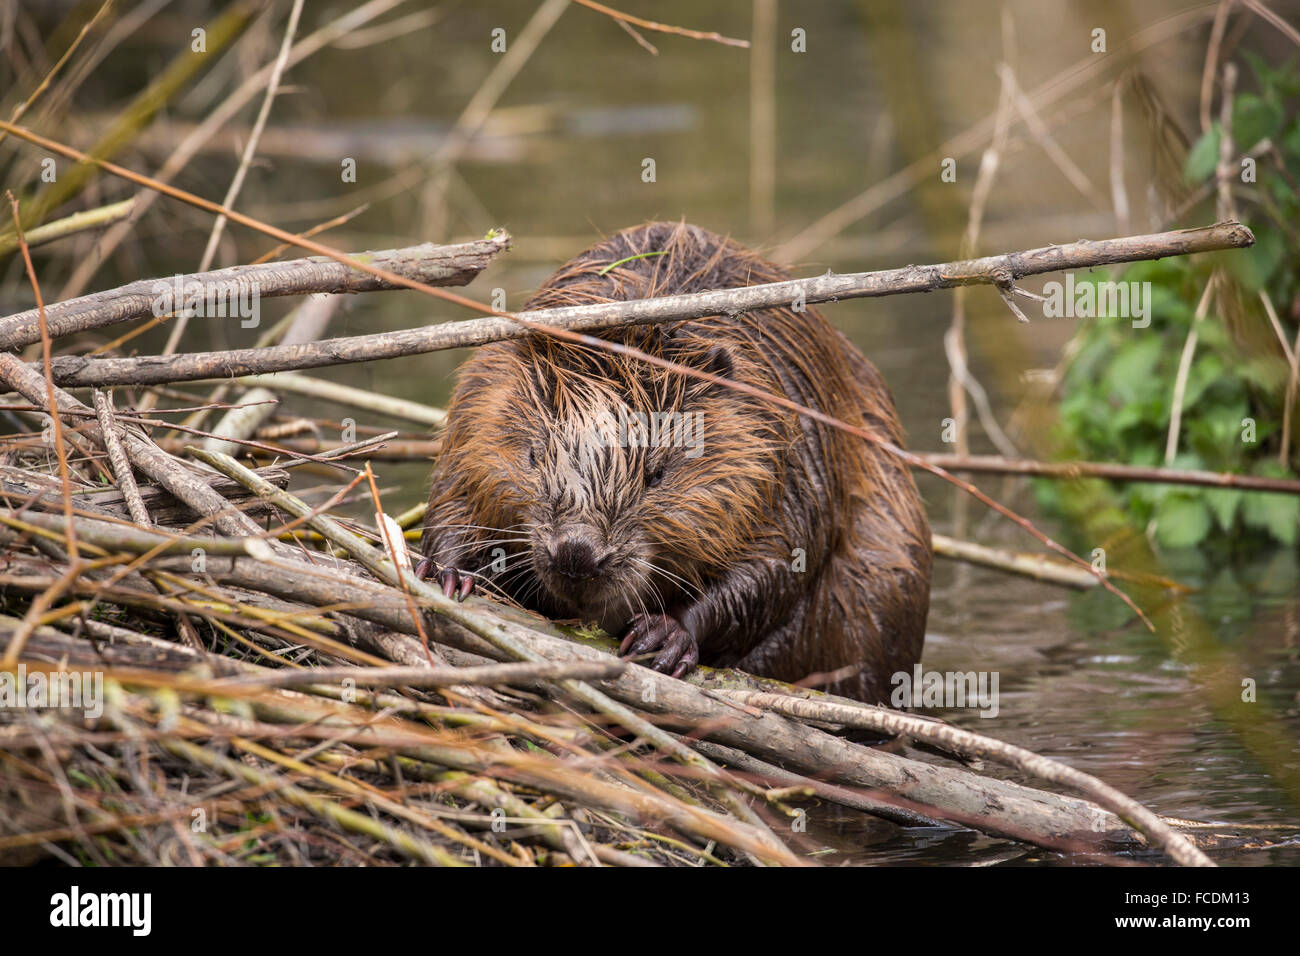 Netherlands, Rhoon, Nature Reserve Rhoonse Grienden. Marshland with willow trees. European beaver with branches at beaver lodge Stock Photo